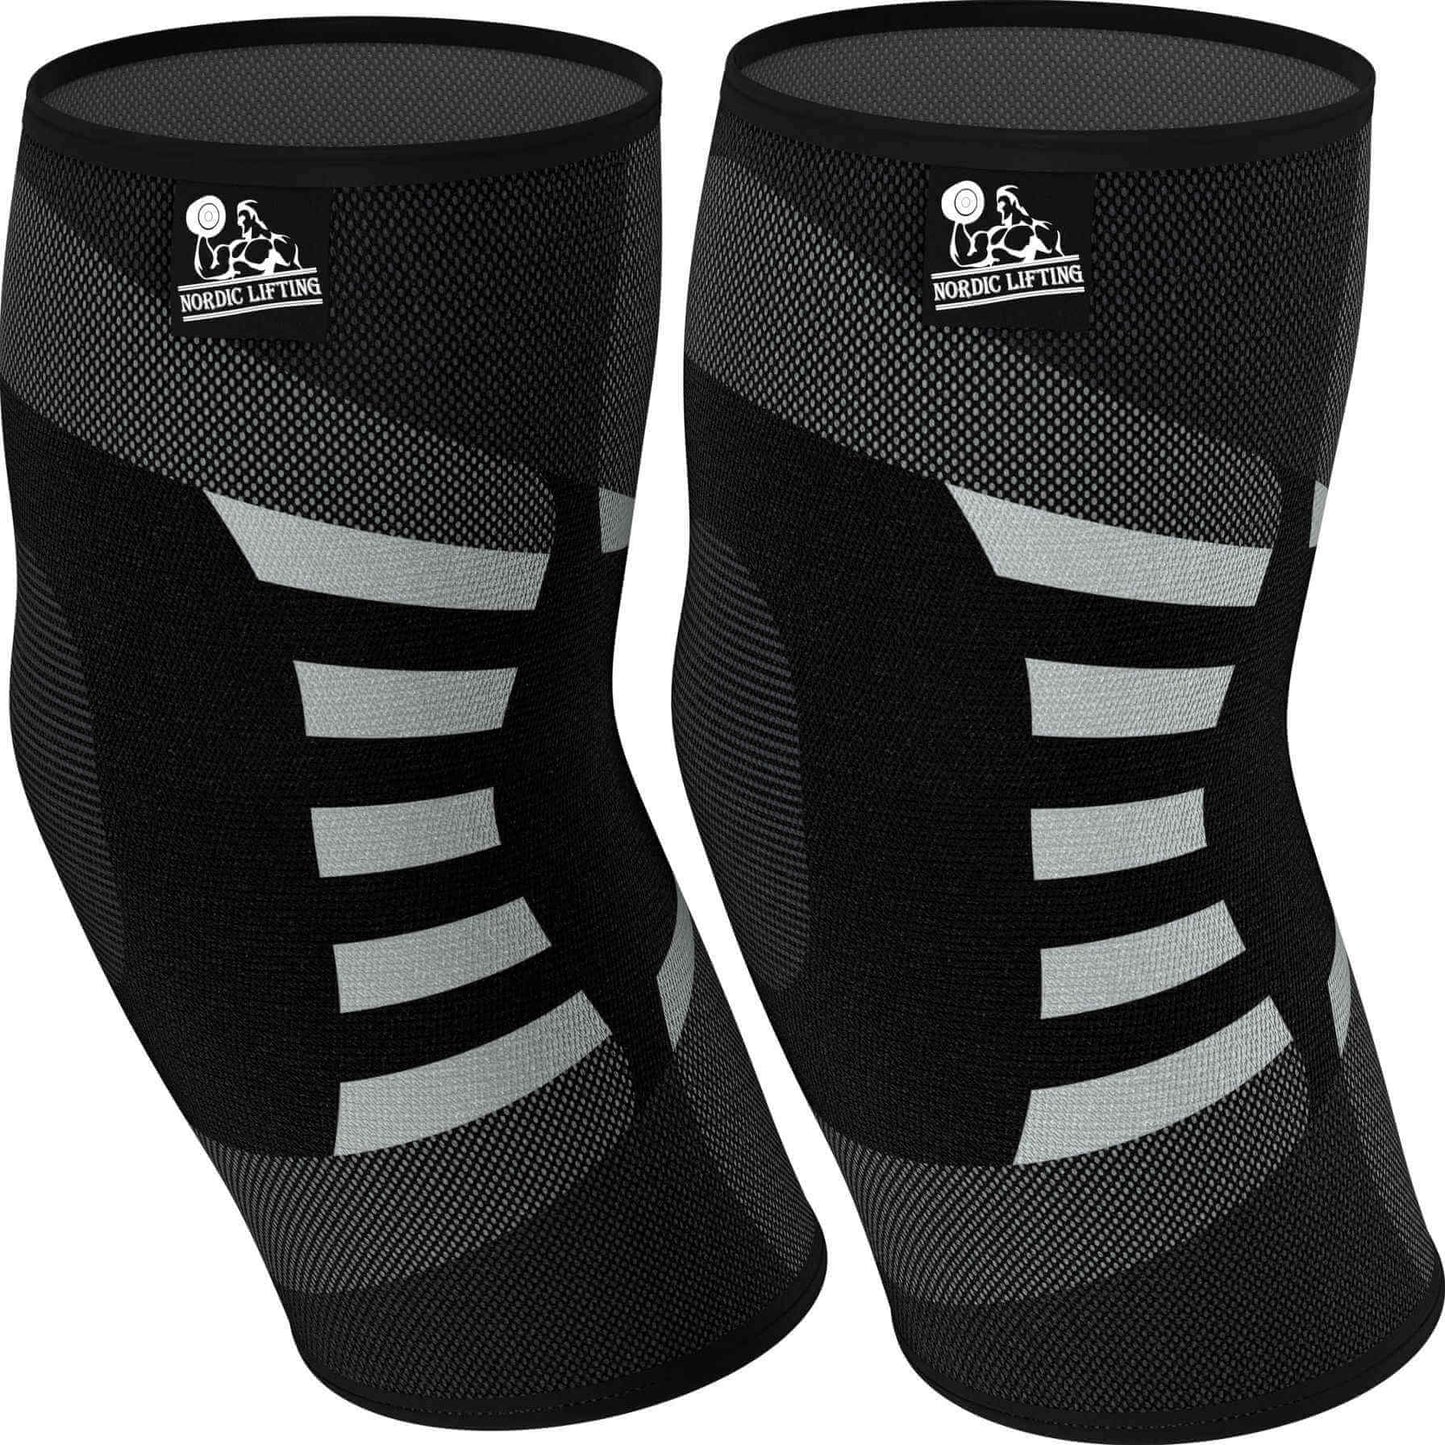 Elbow Compression Sleeves